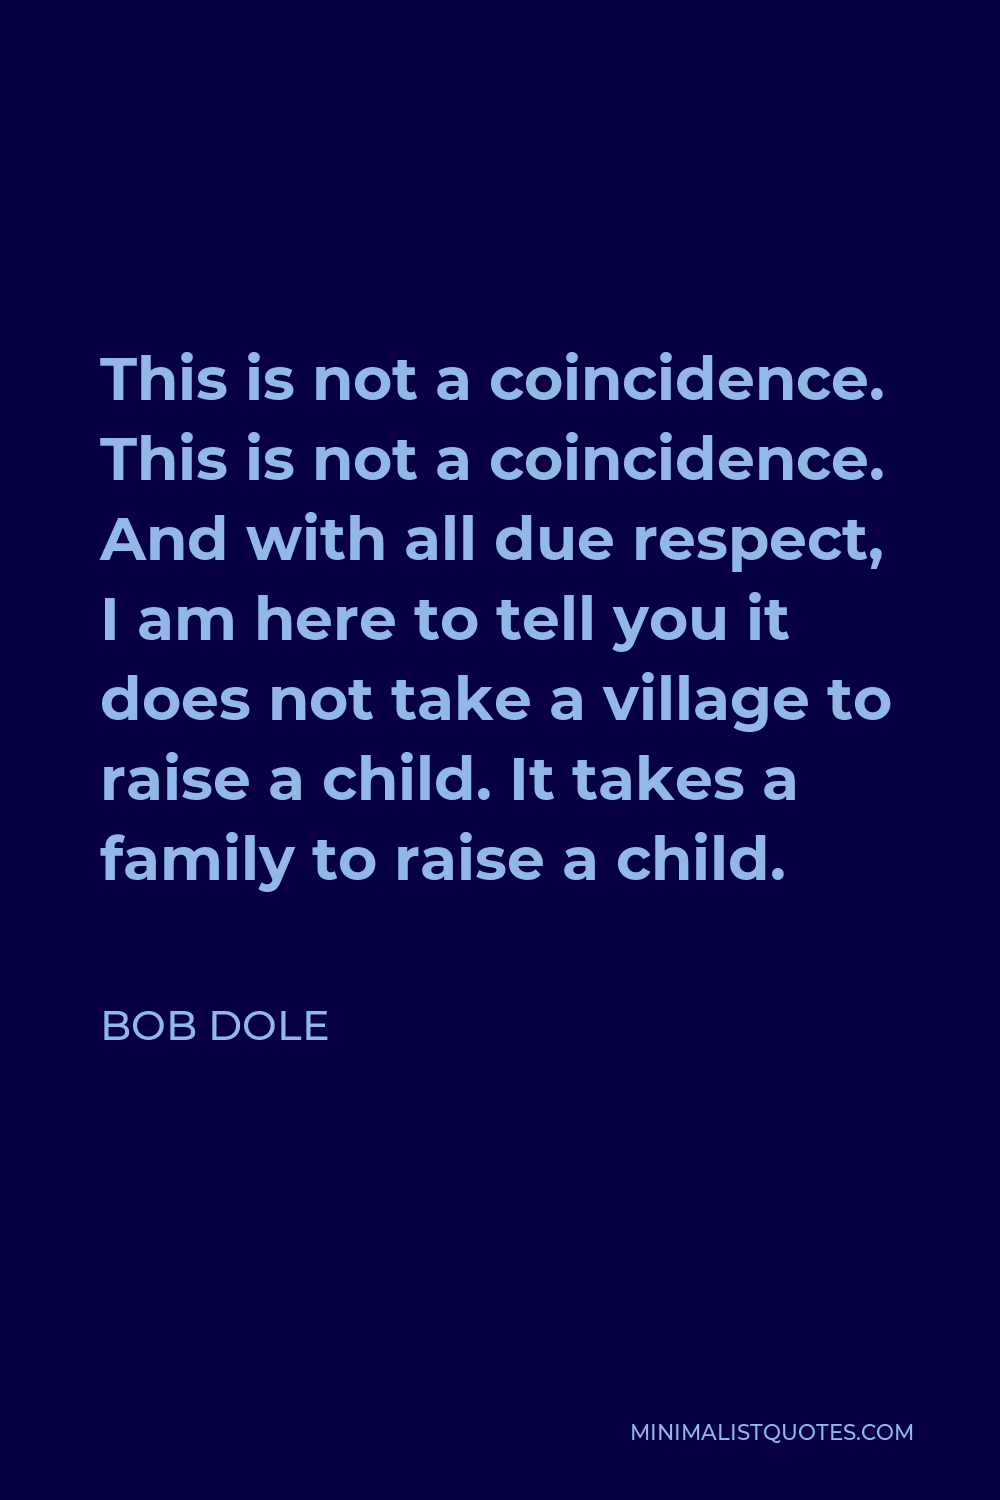 Bob Dole Quote - This is not a coincidence. This is not a coincidence. And with all due respect, I am here to tell you it does not take a village to raise a child. It takes a family to raise a child.